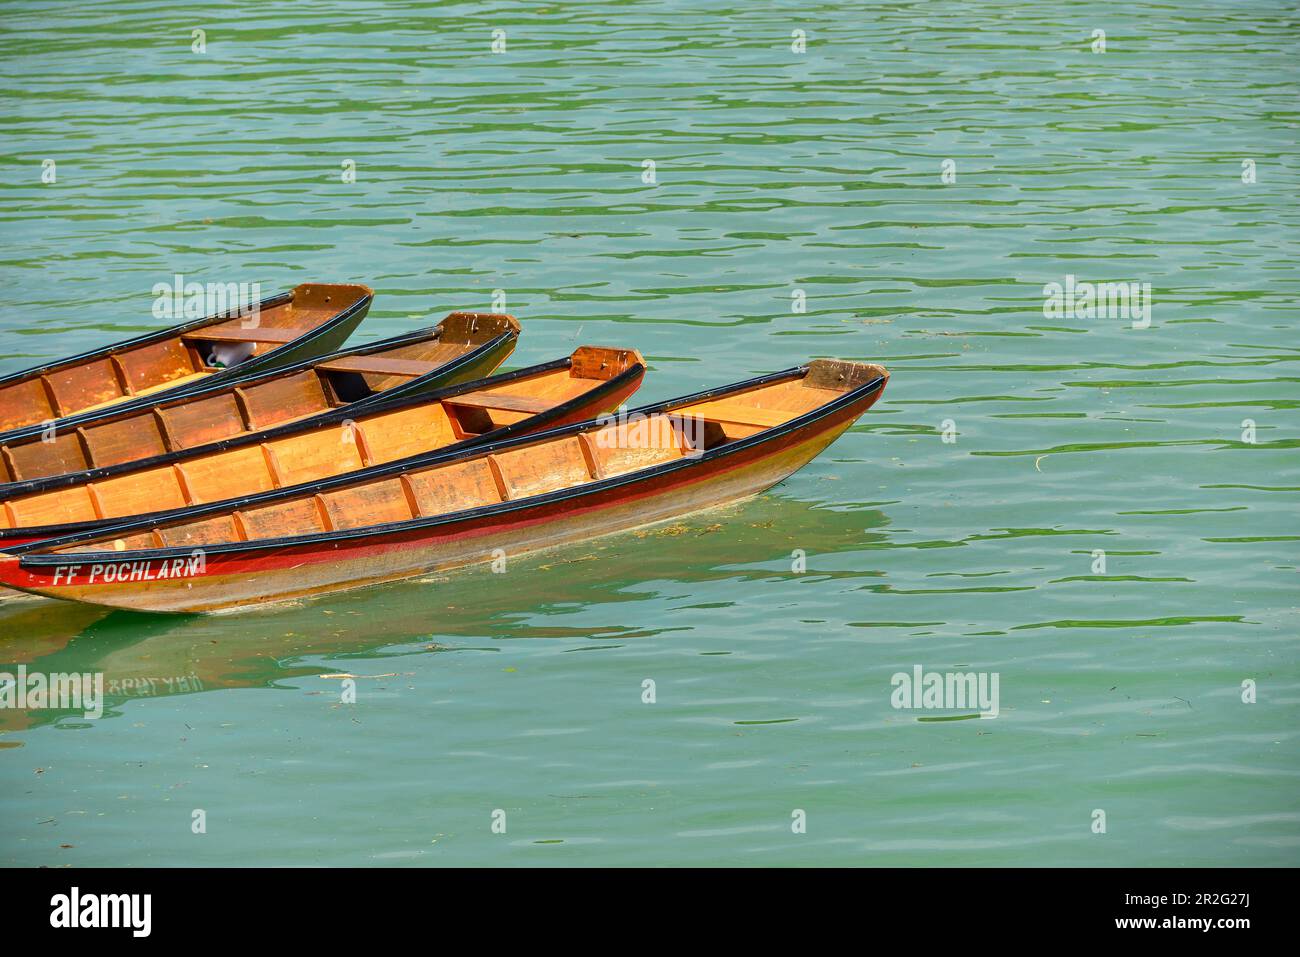 Several rowing boats on the Danube near Pöchlarn, Austria Stock Photo